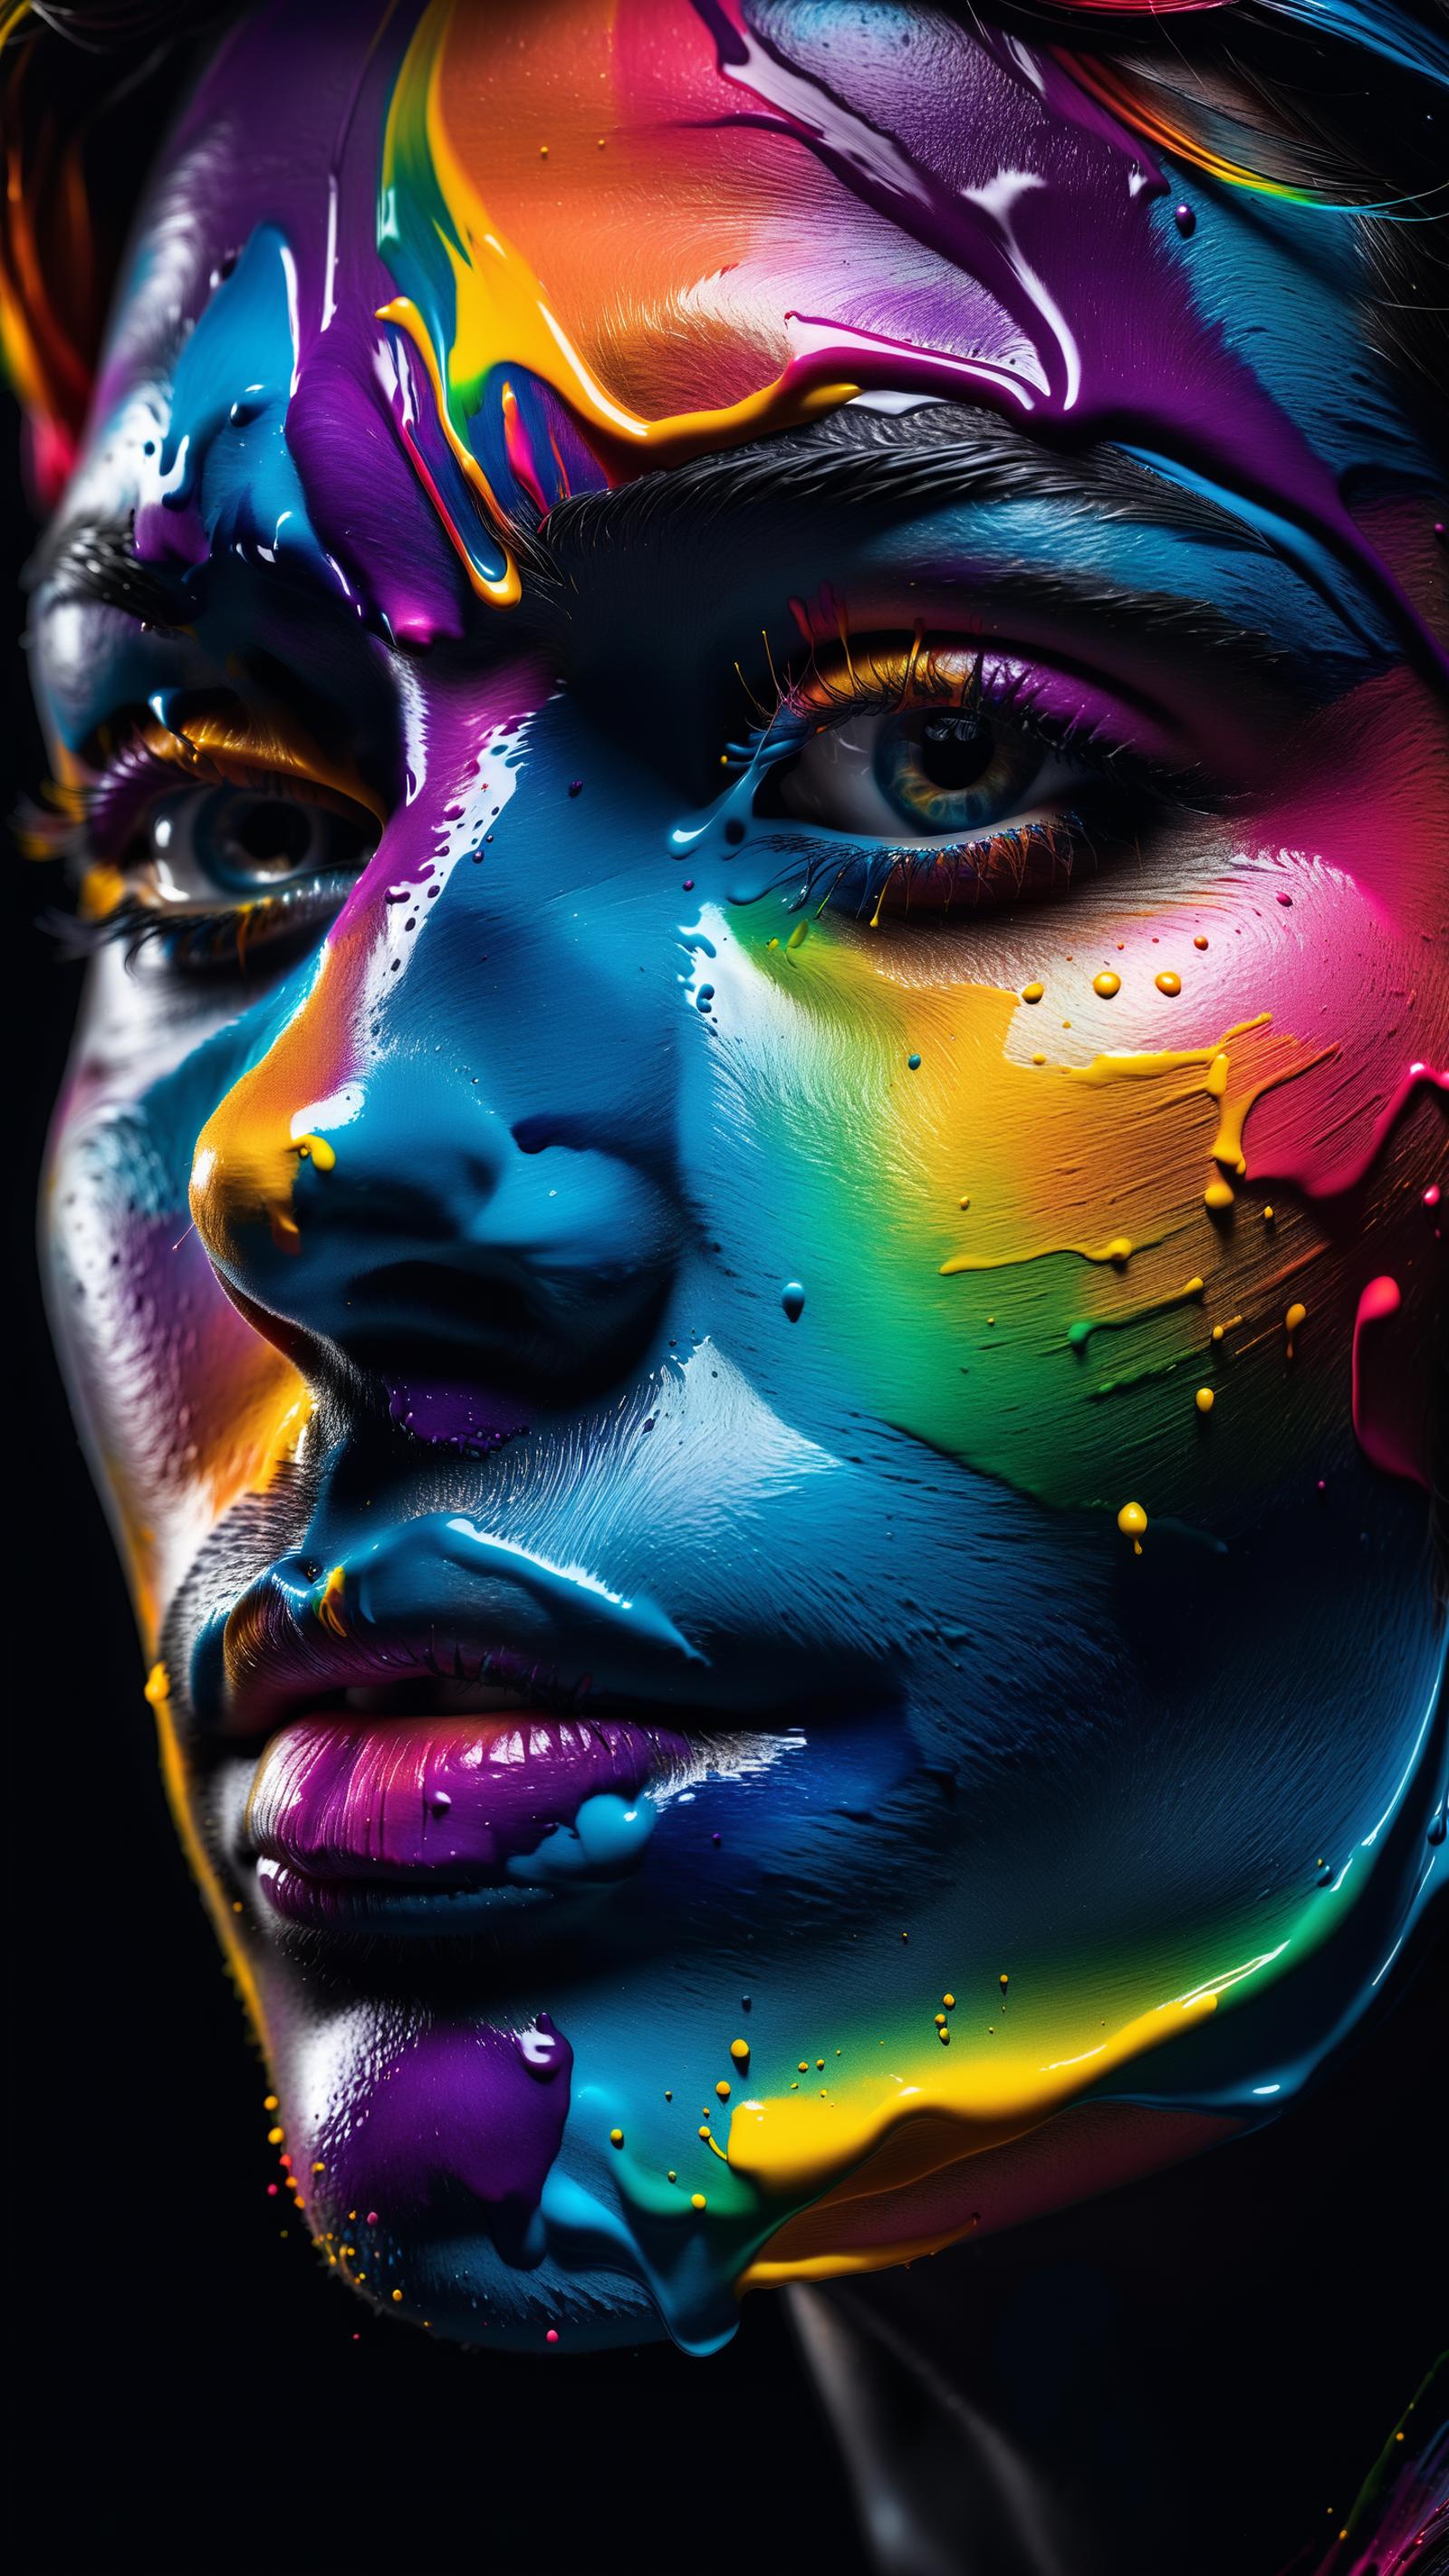 A woman's face painted in rainbow colors, with a close-up view of her nose and mouth.